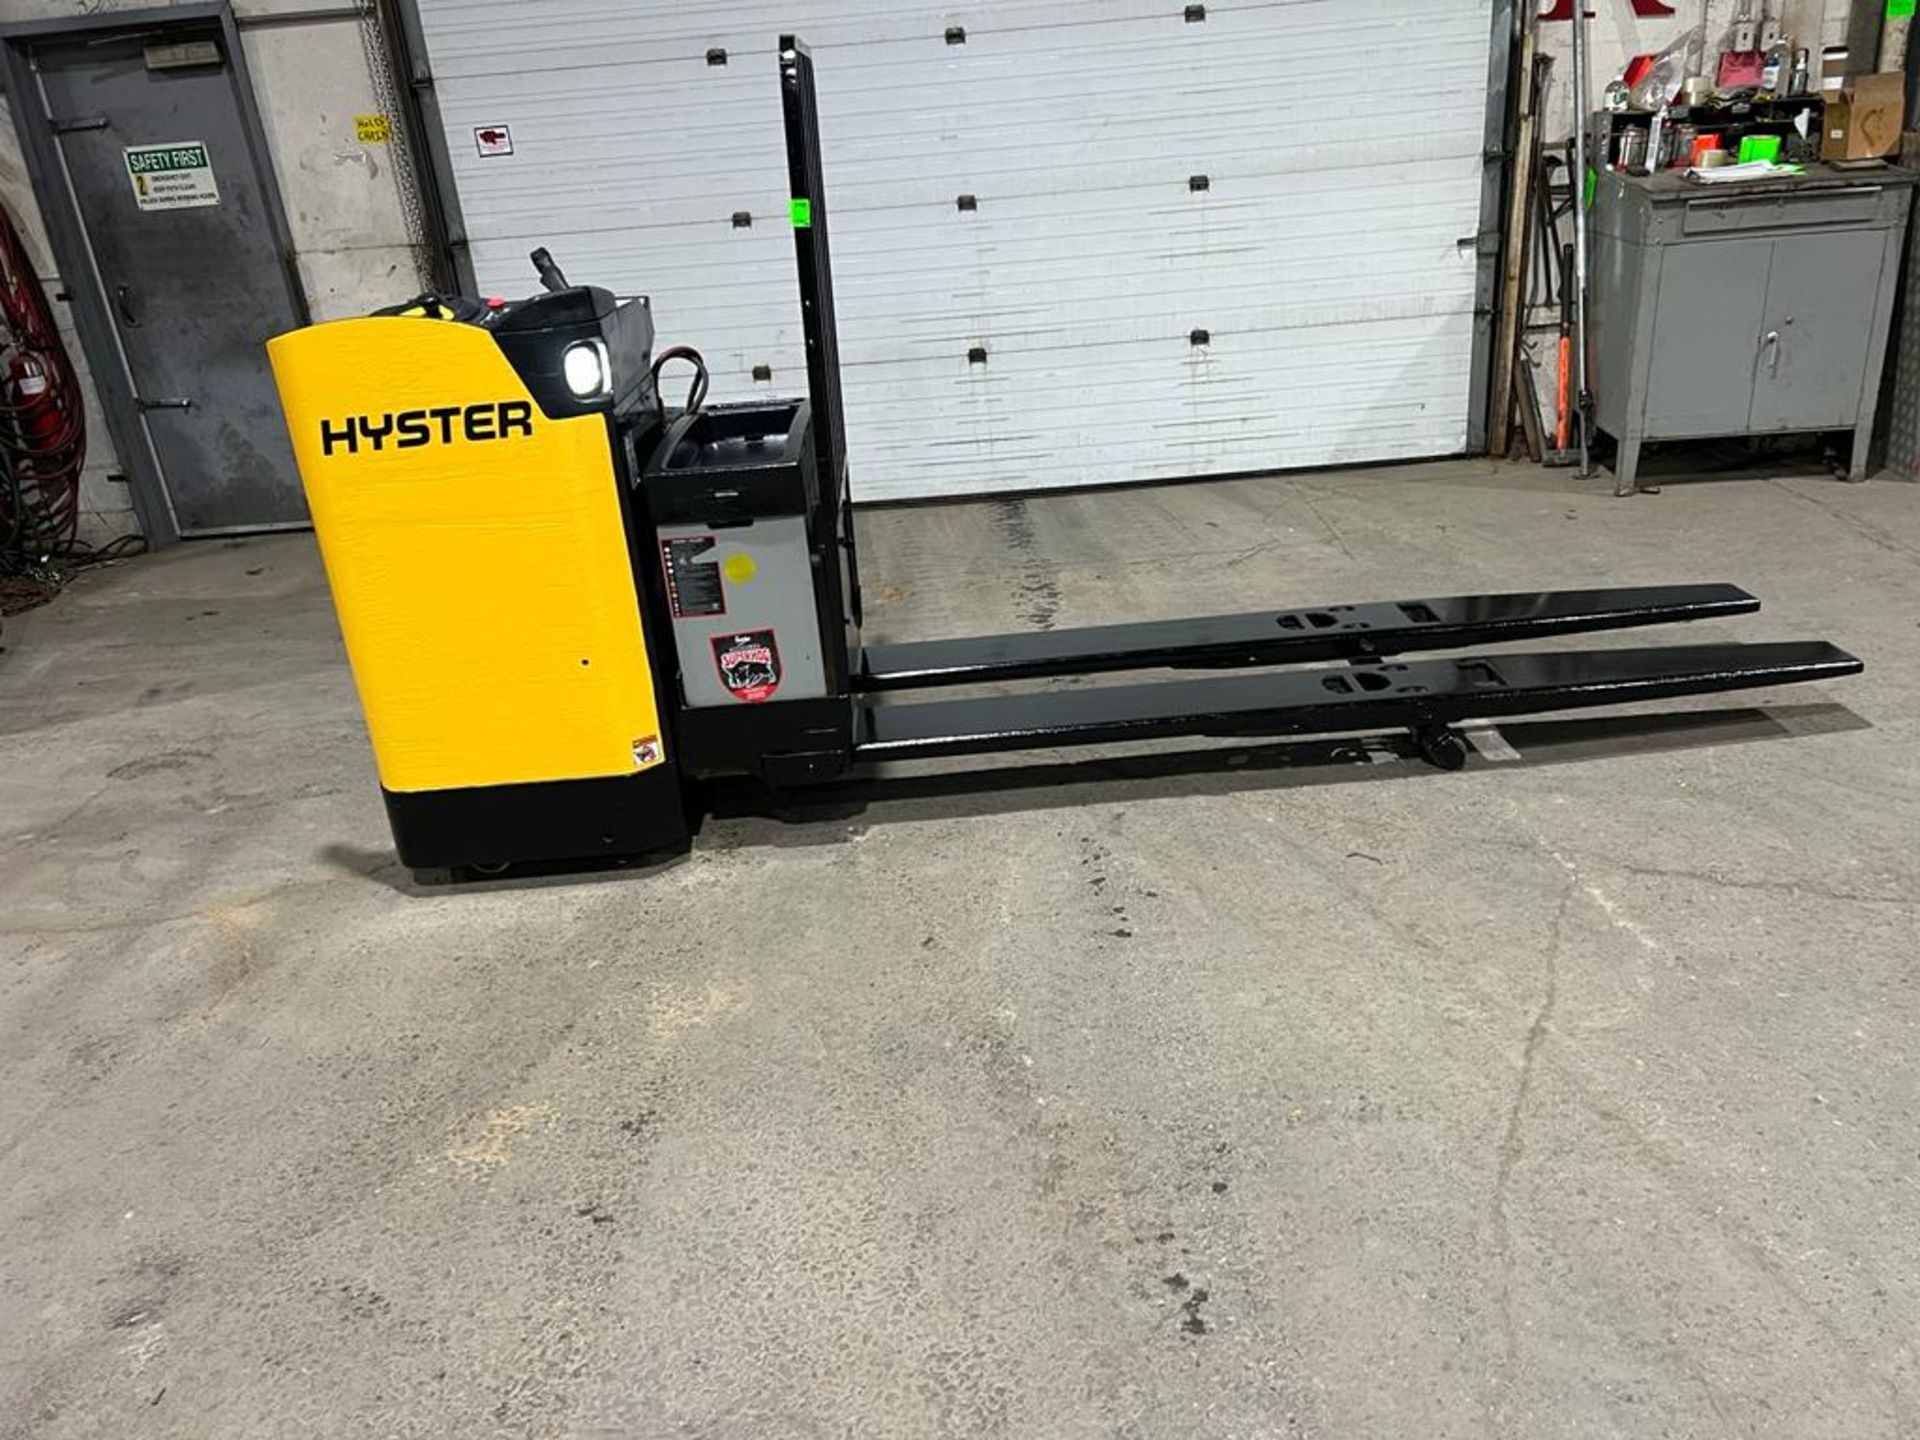 NICE 2015 Hyster Ride-On END RIDER Powered Pallet Truck 8' Long Forks 8000lbs capacity Safety to